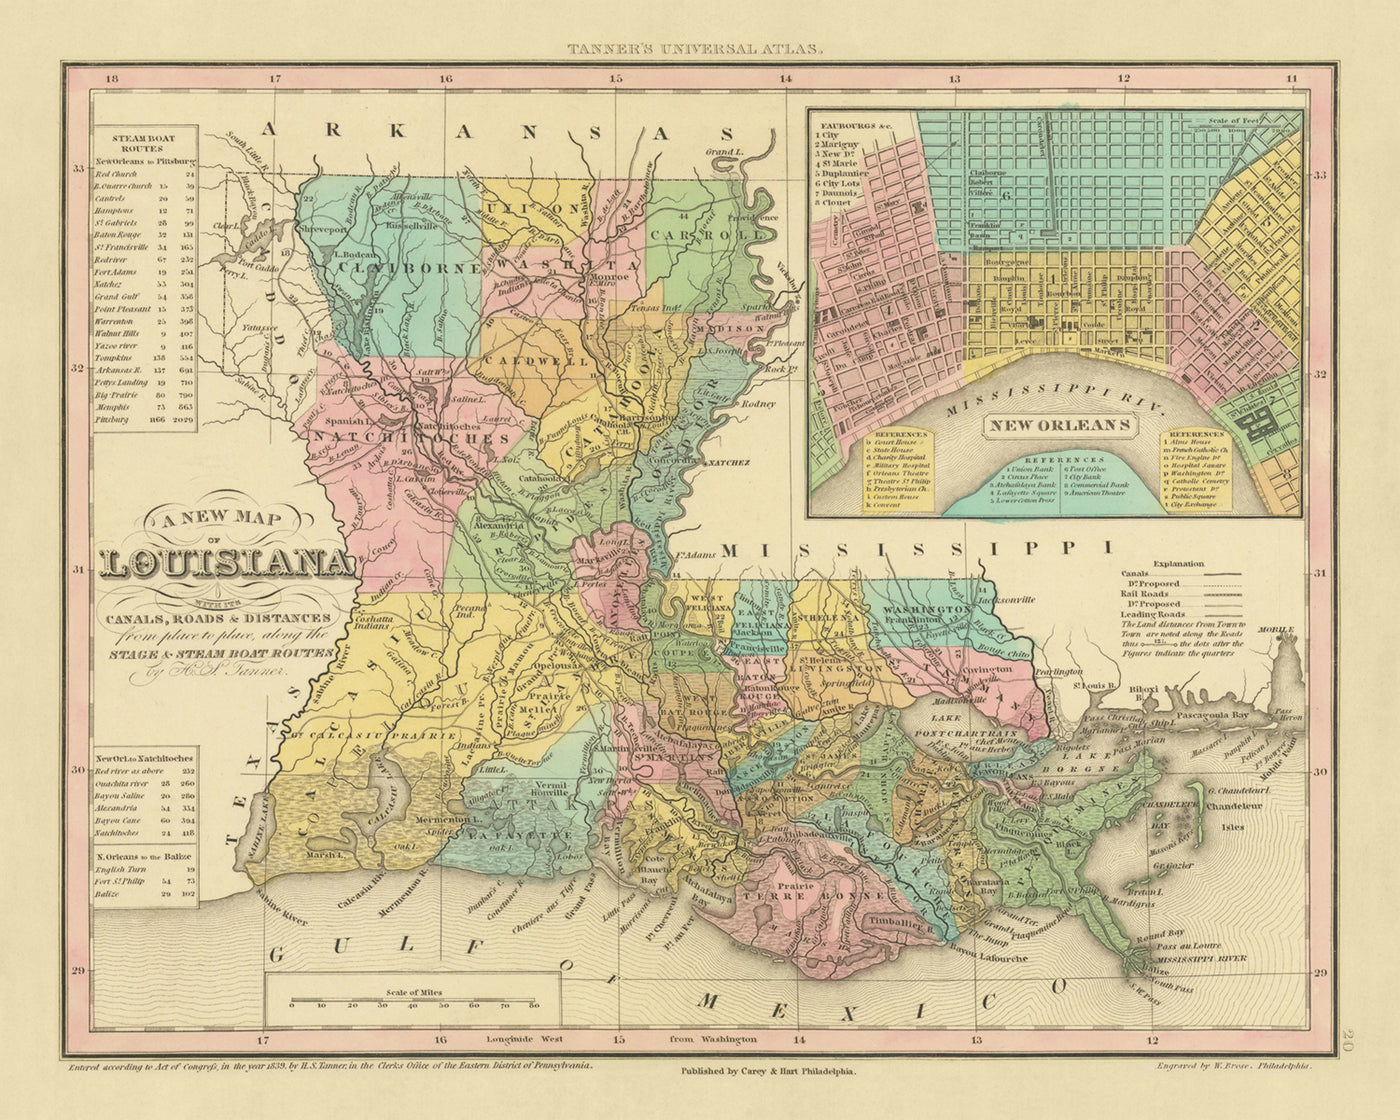 Old Map of Louisiana by Tanner, 1843: New Orleans, Baton Rouge, Lake Pontchartrain, the Mississippi River Delta, and the Gulf of Mexico